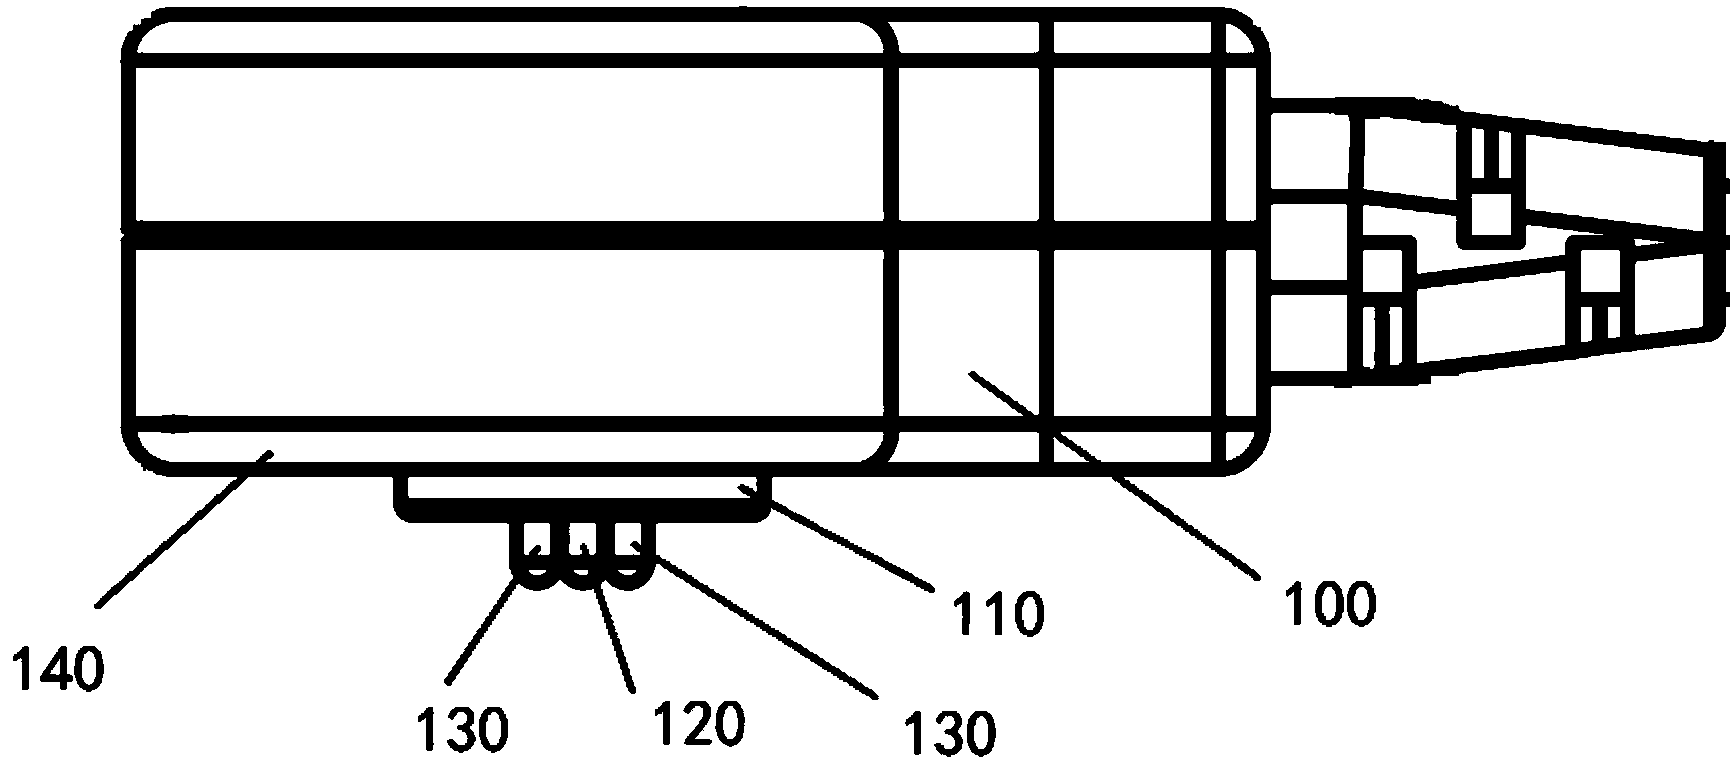 Electric connection device and connector